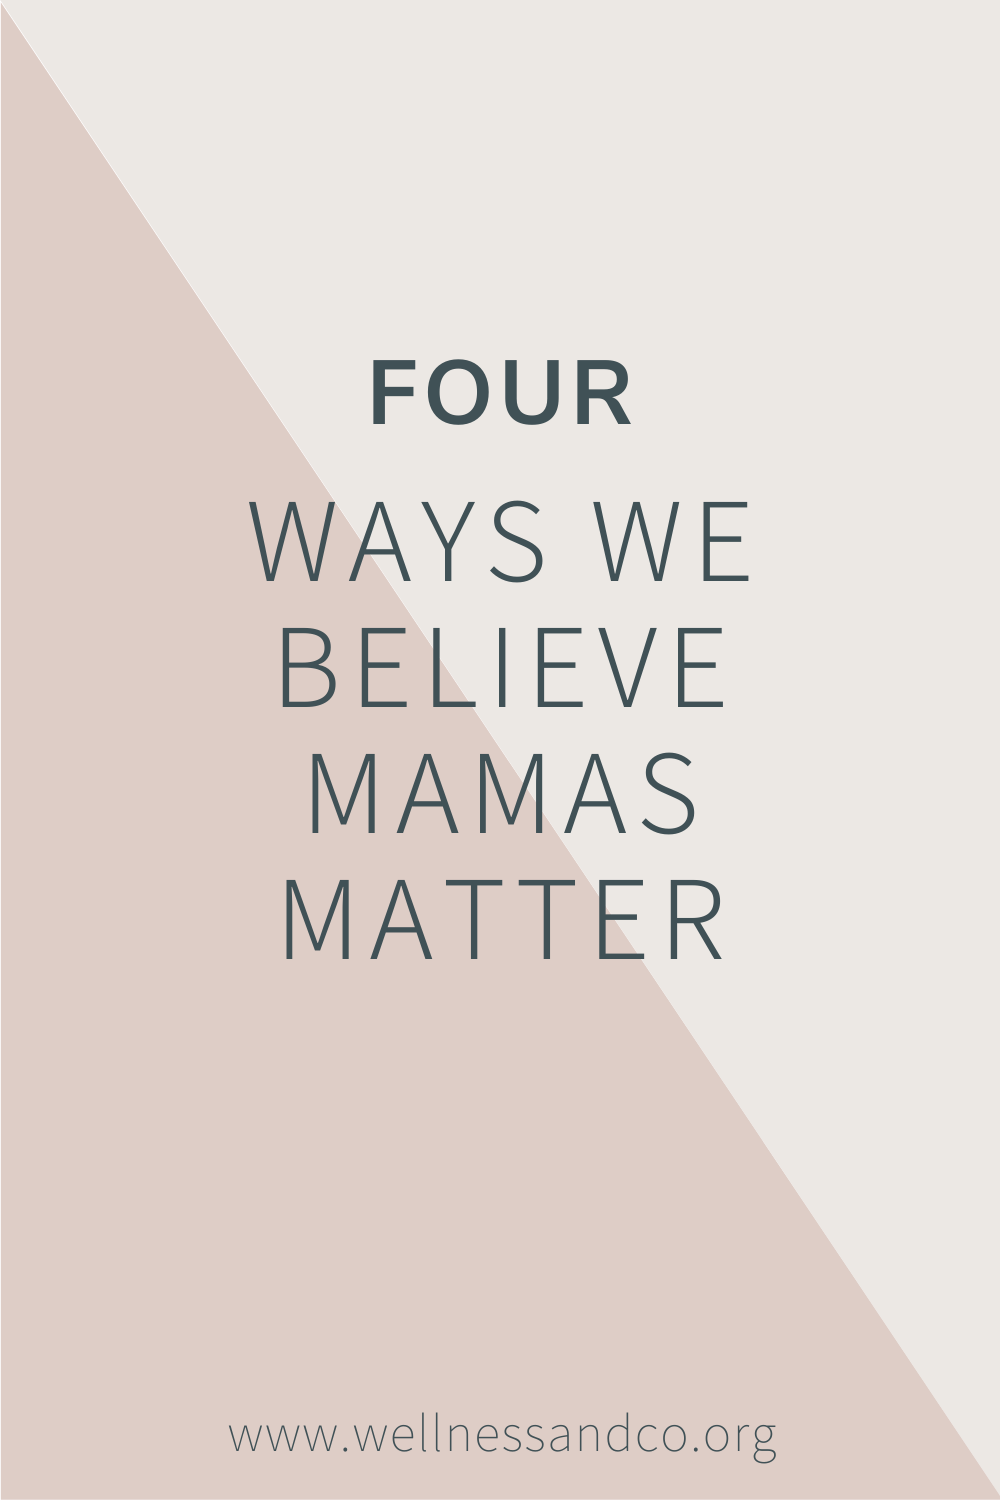 Four Ways We Believe Mamas Matter | Sometimes making our mental health a priority is tough. That can become even more complicated when we are not attuned to our own needs and focused on the needs of baby during pregnancy. This post explores four important ways you can value your own mental health journey before, during, and after pregnancy, cheers!